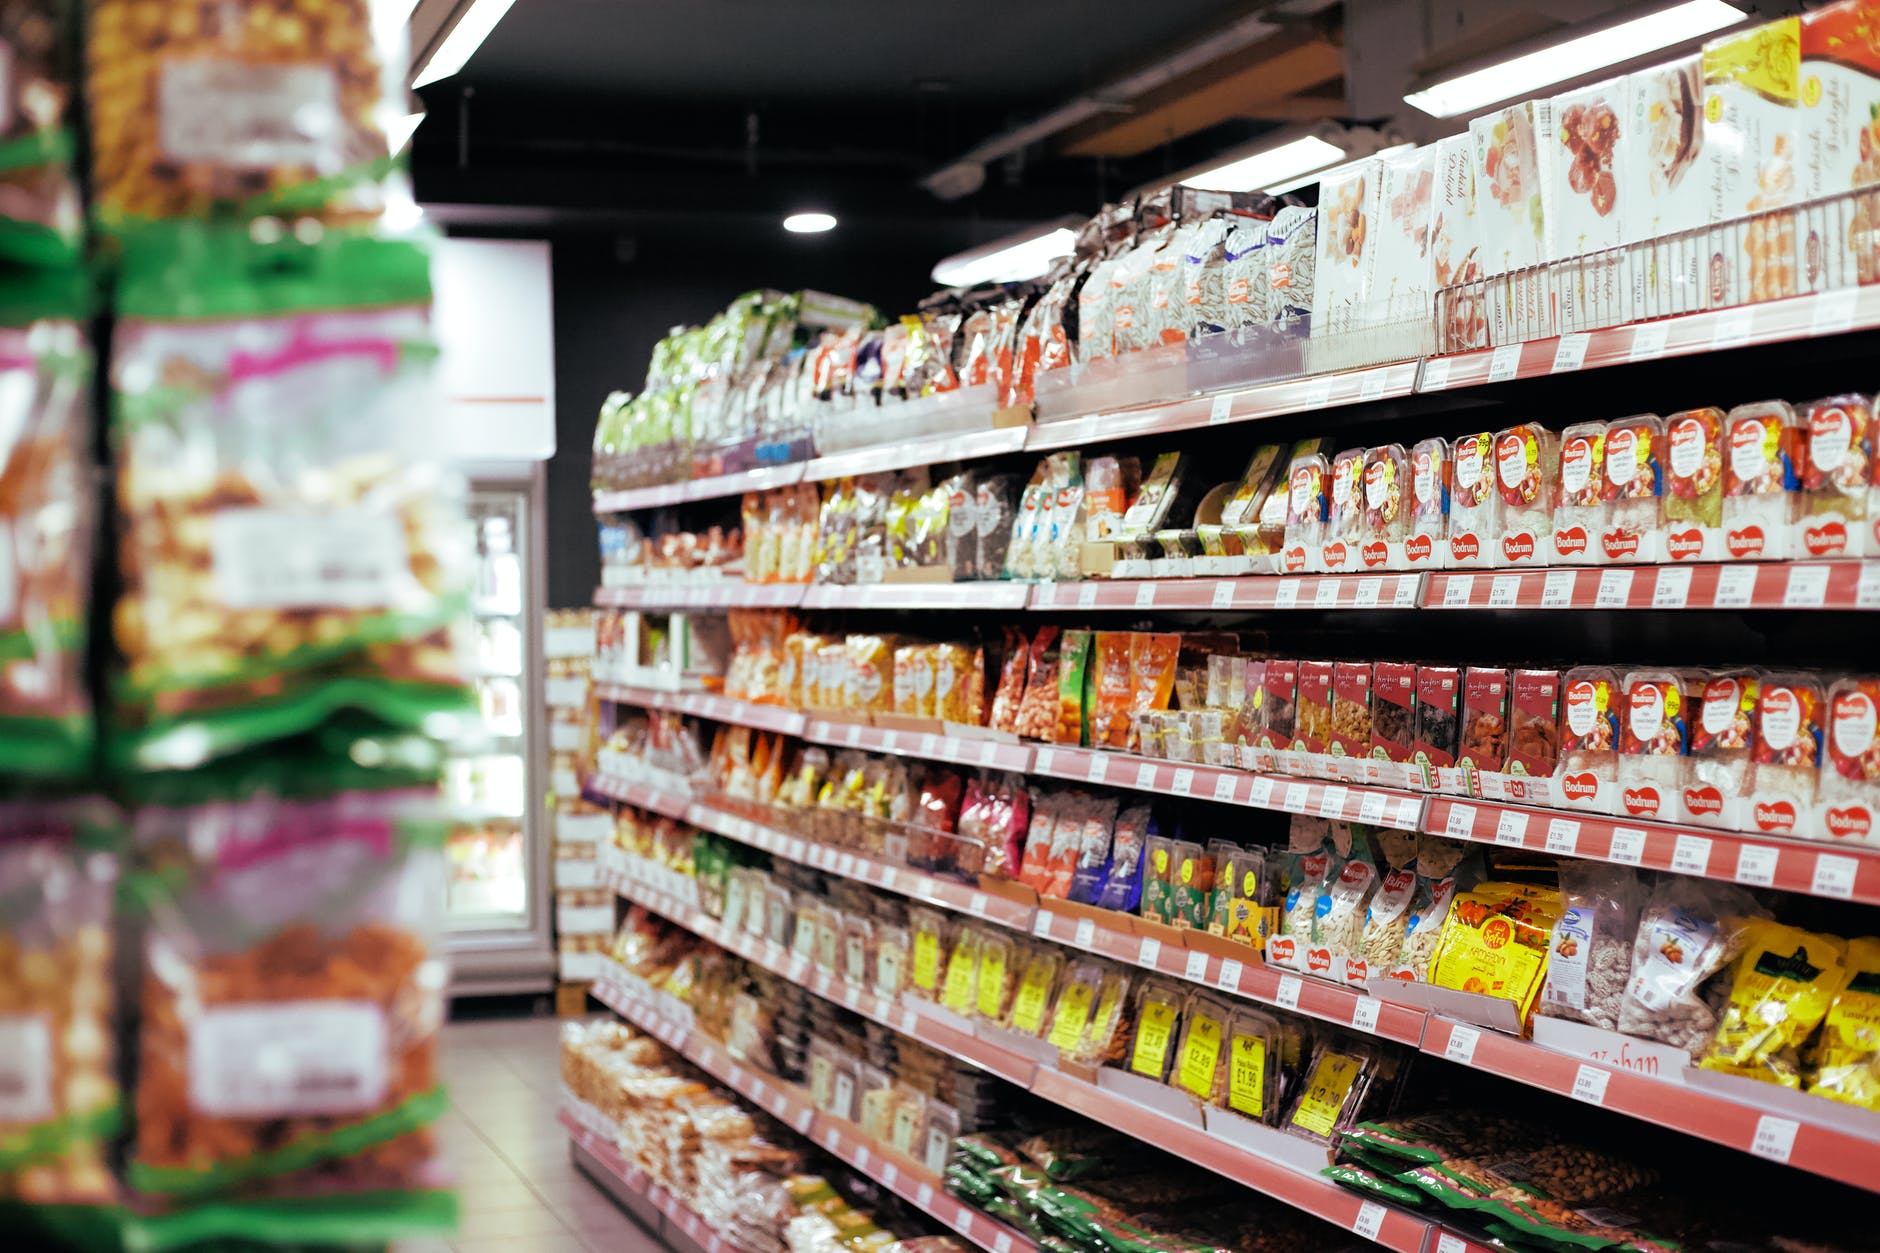 An aisle in a fully stocked supermarket | Photo: Pexels